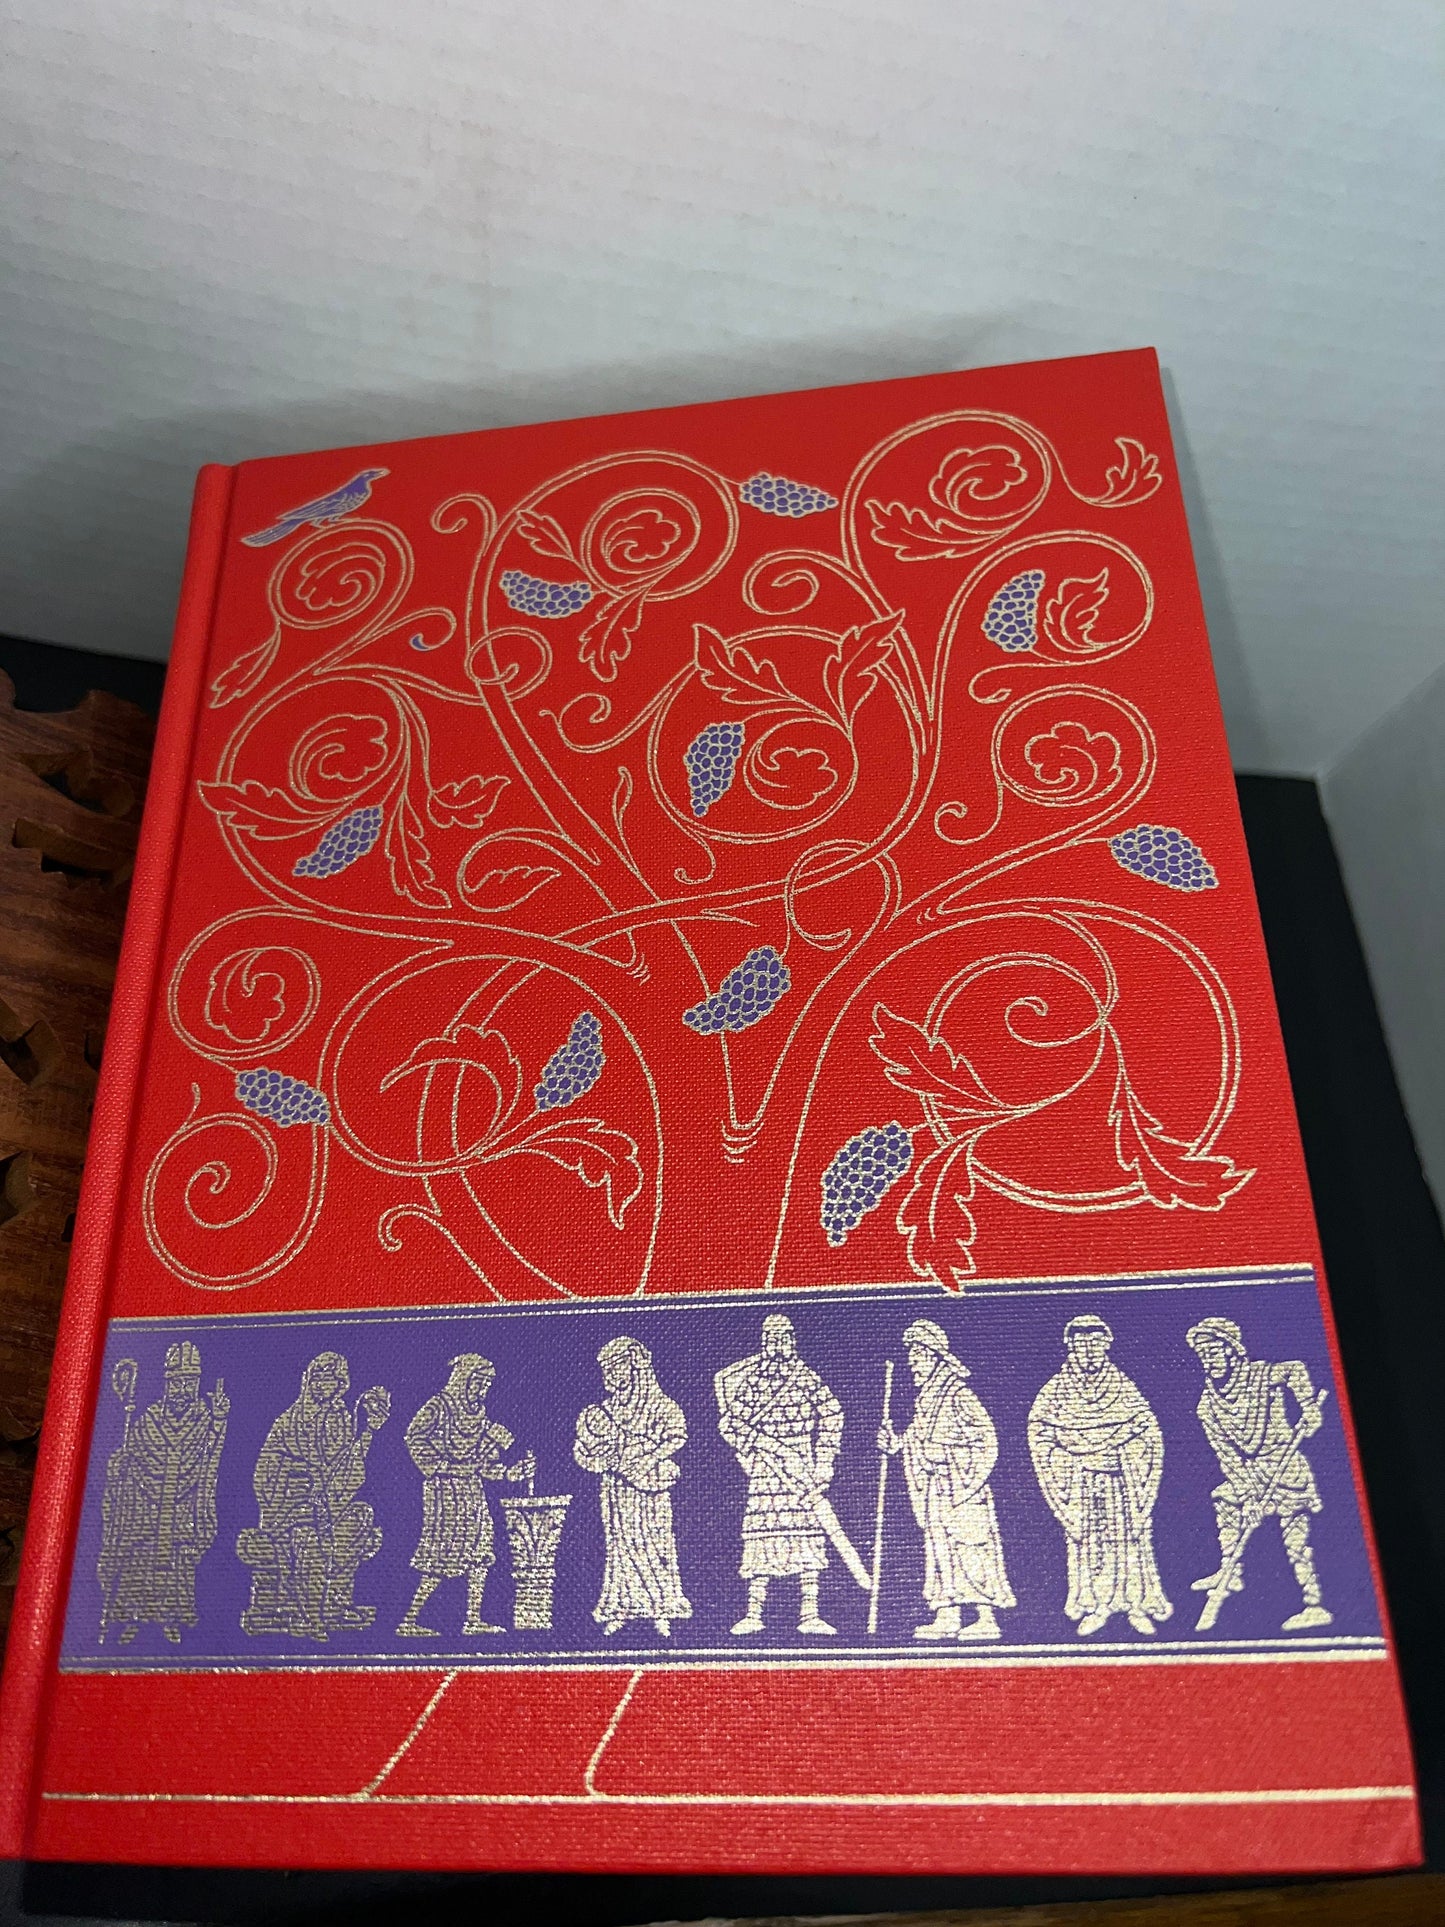 The story of the Middle Ages the folio society gorgeous 5 volume set & case 1998 illustrated history